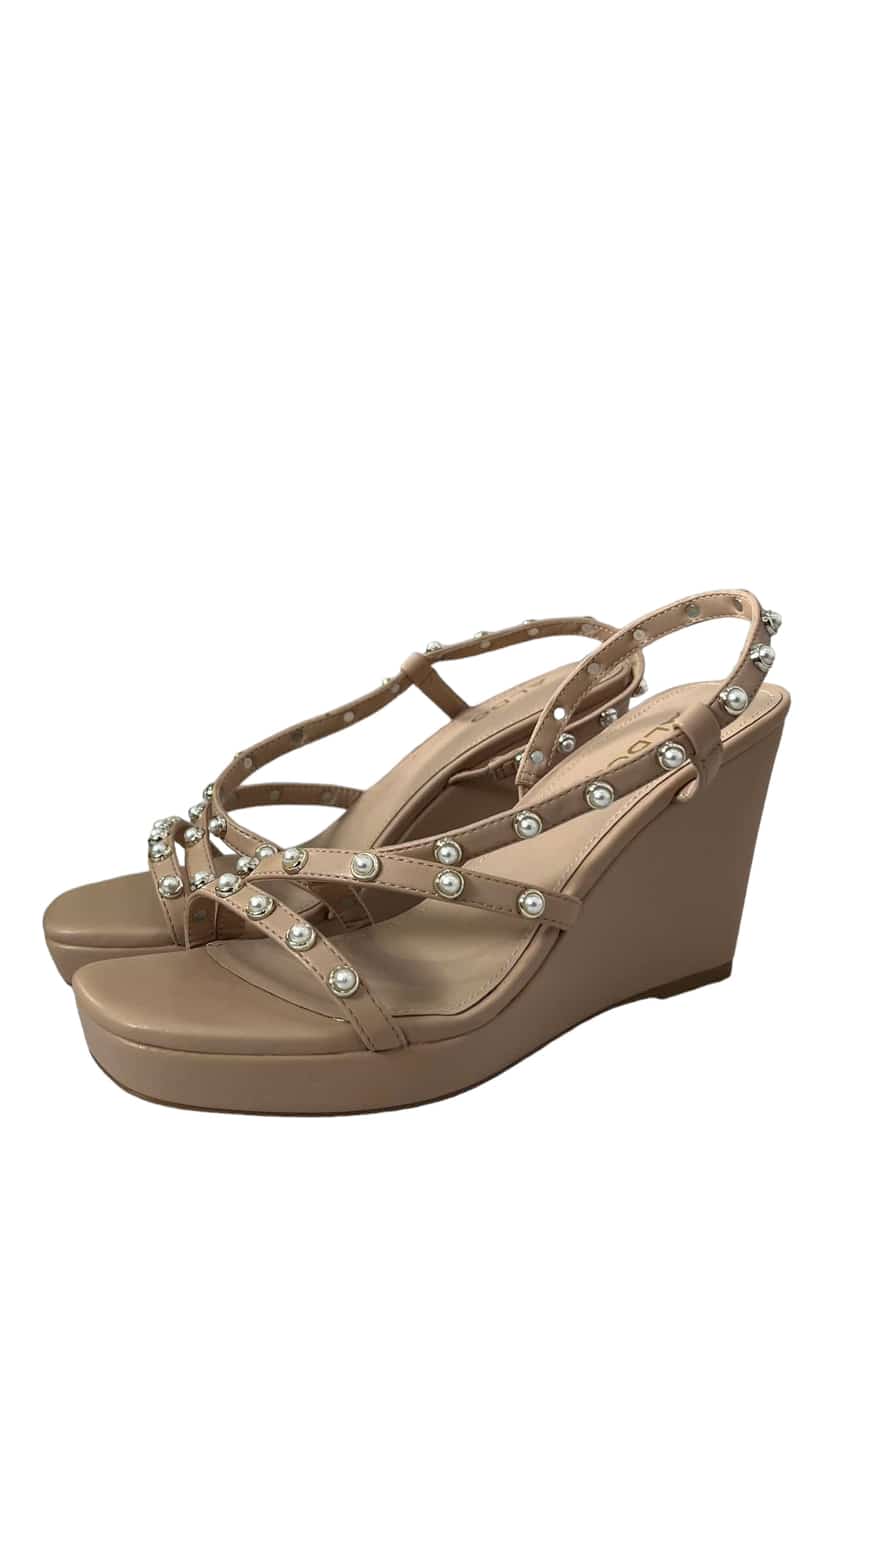 ALDO NUDE LEATHER PEARL STUDDED STRAP WEDGE SANDAL